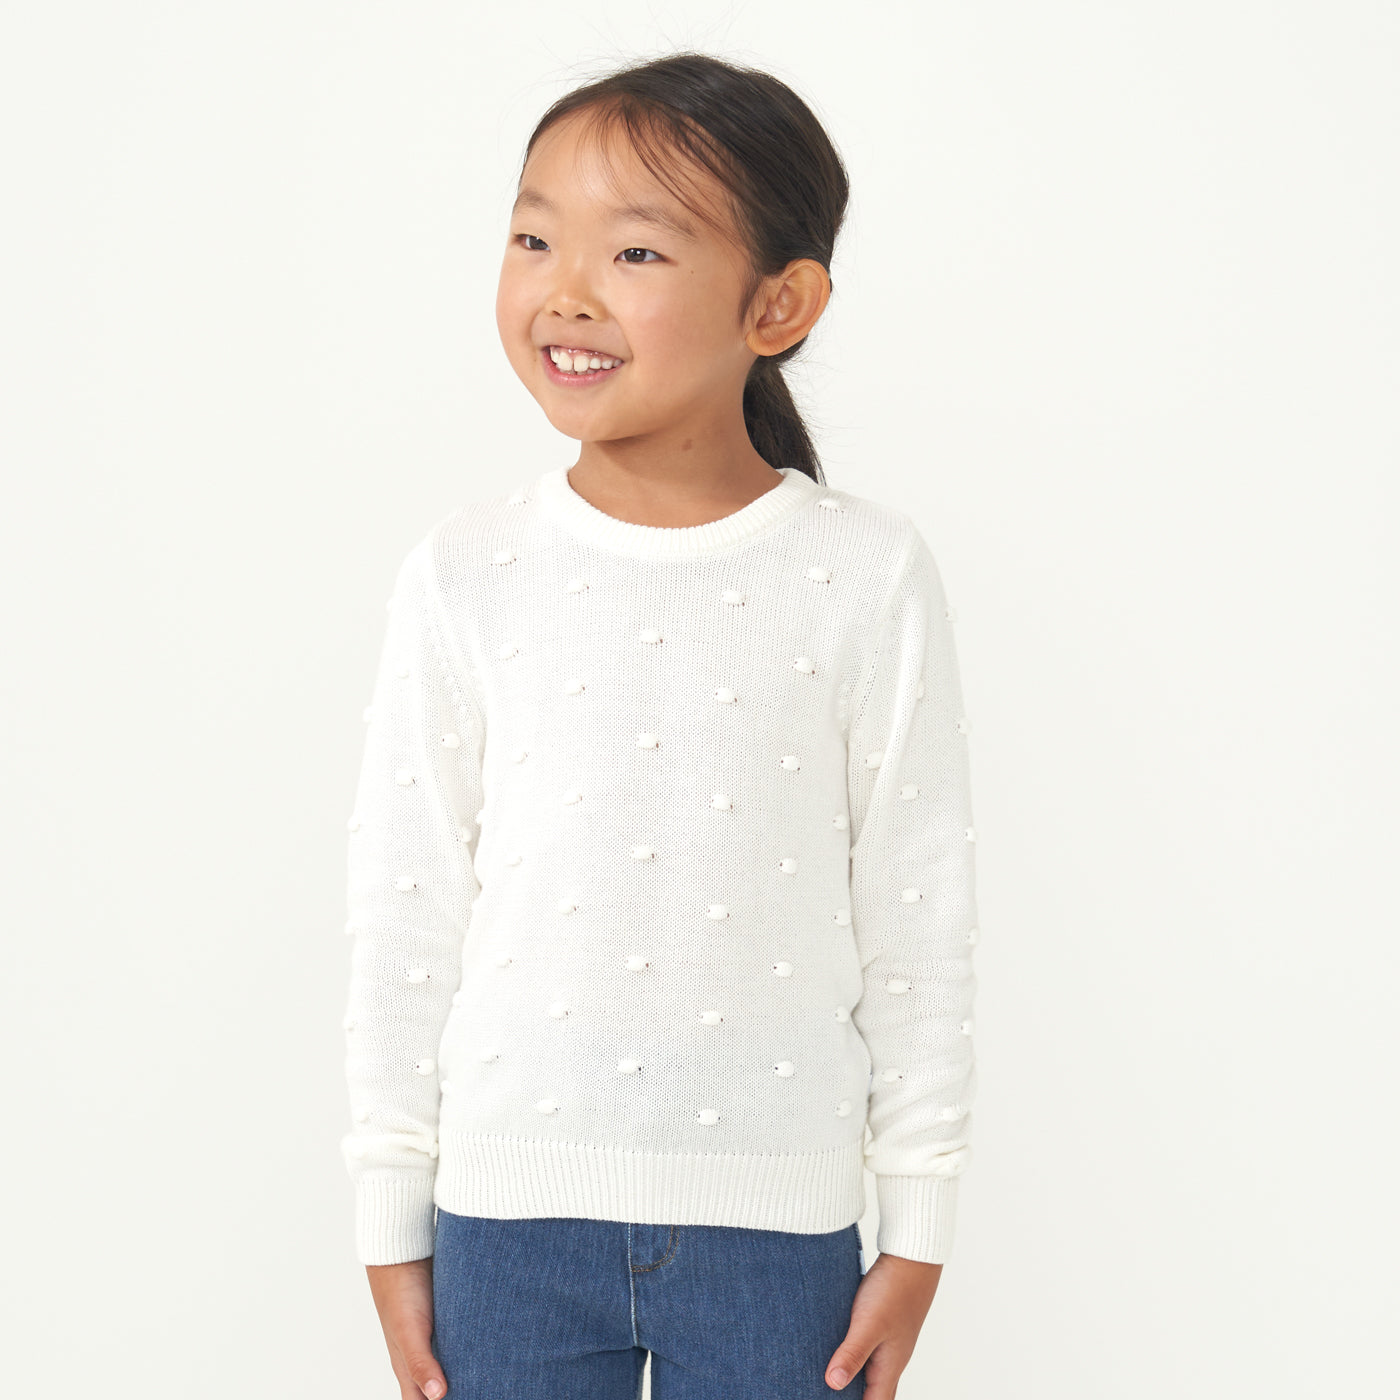 Child looking to the side wearing an Ivory pom pom sweater